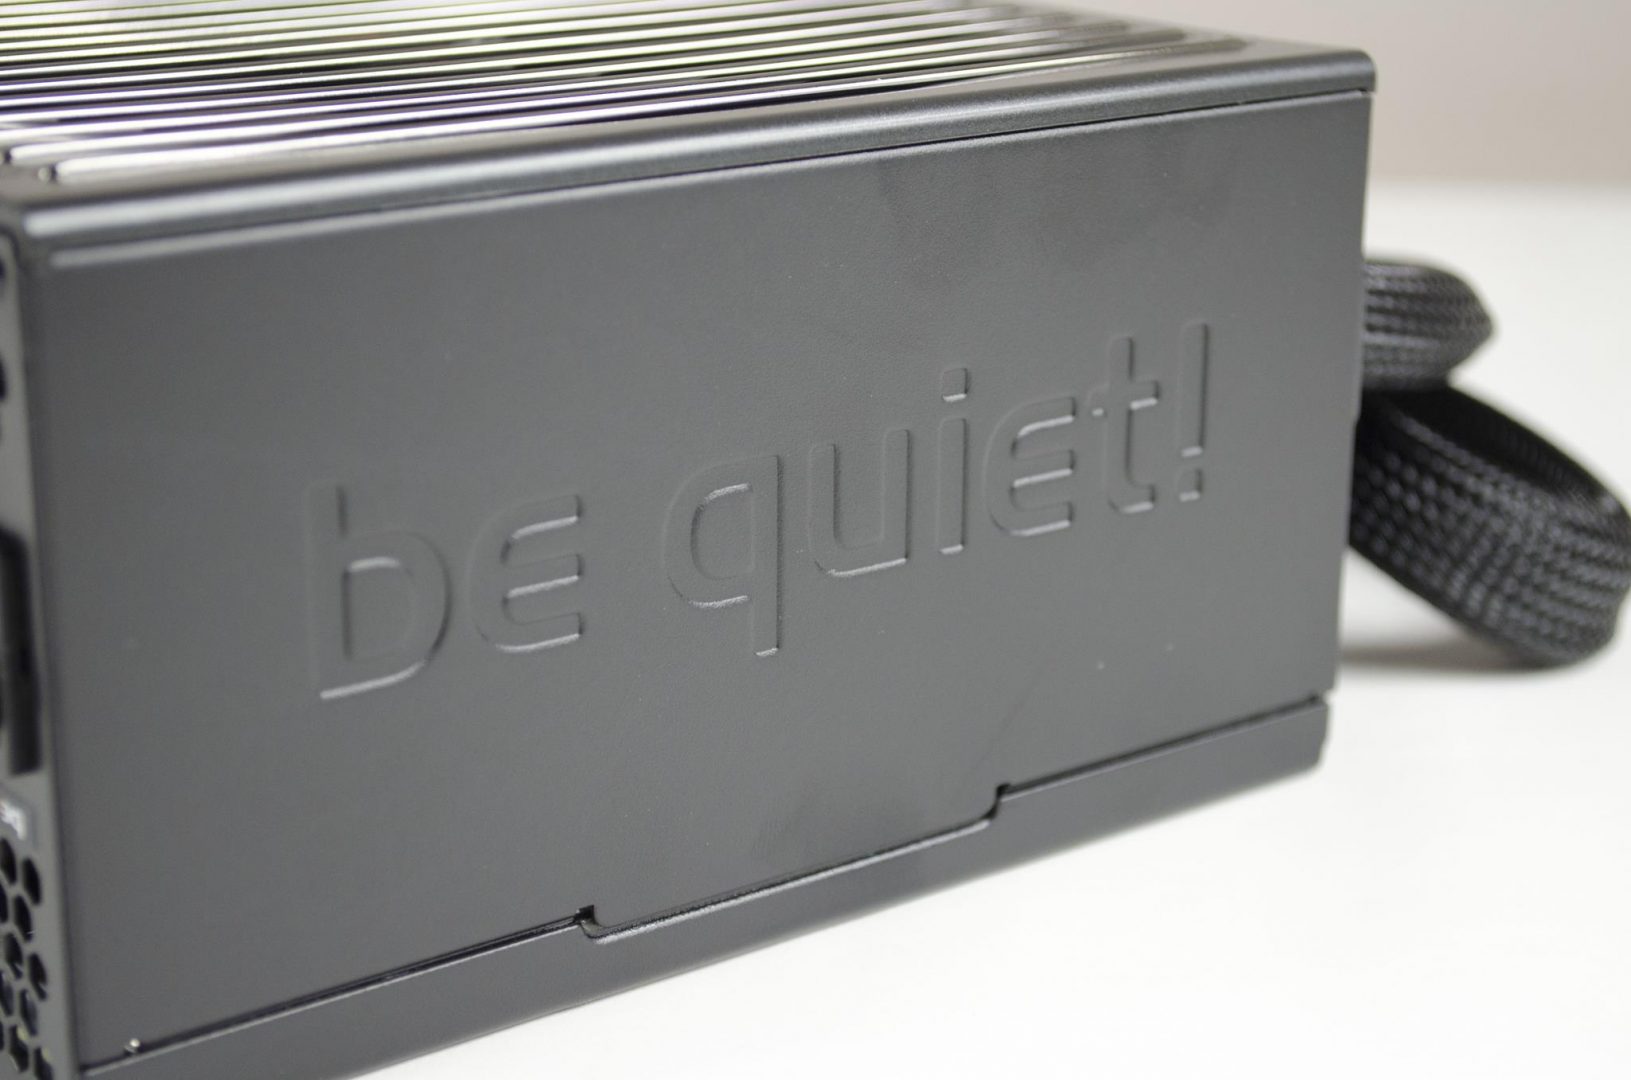 be quiet! Straight Power 10 600W Power Supply Overview